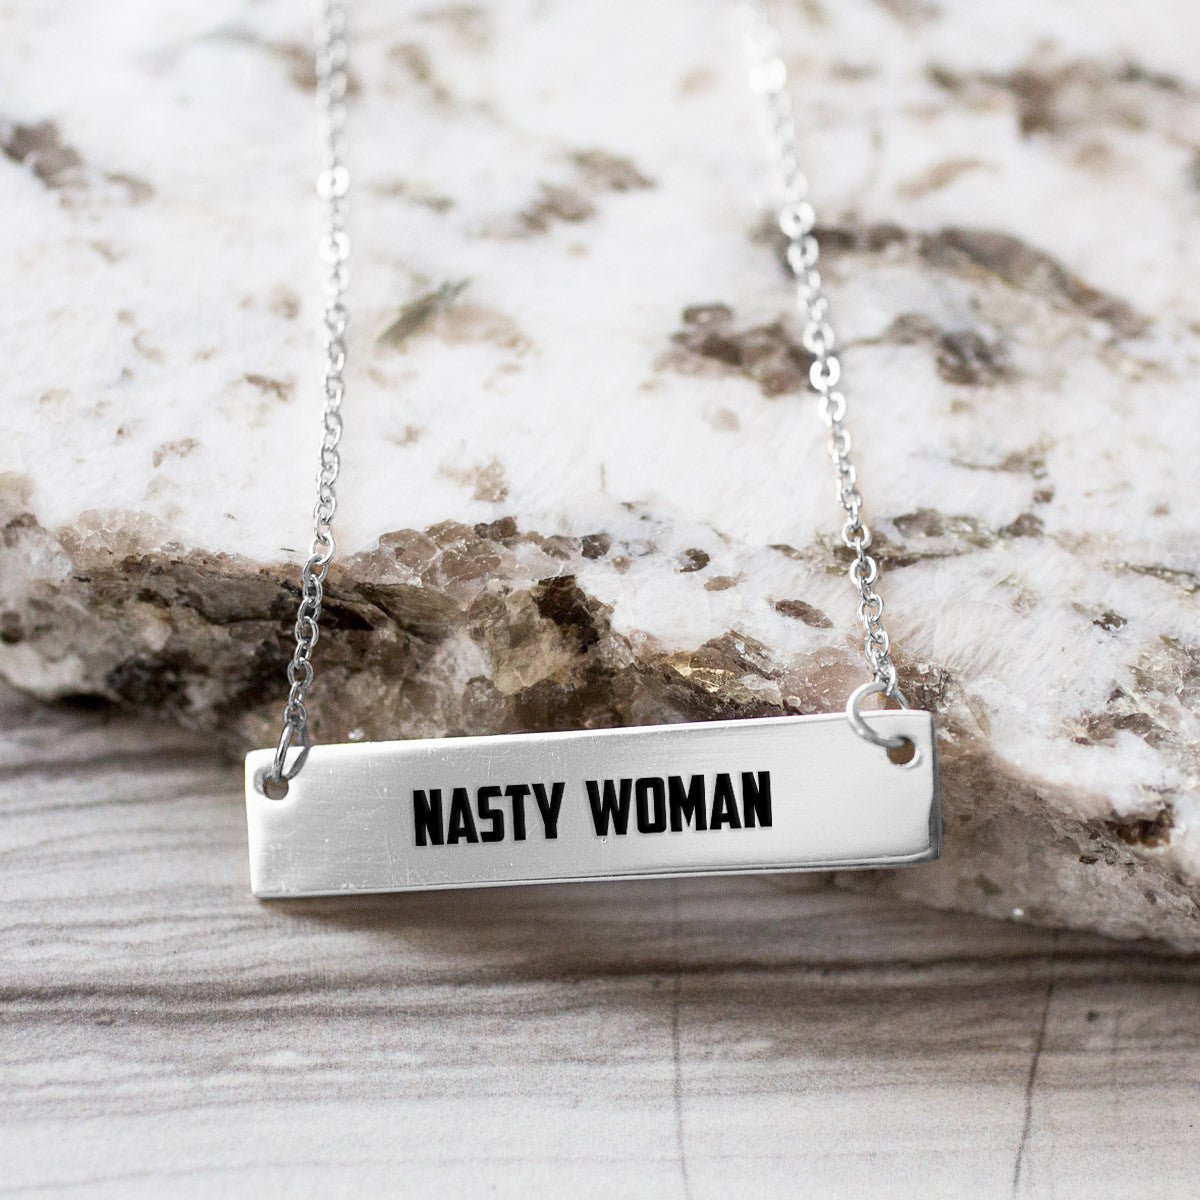 Nasty Woman Gold / Silver Bar Necklace - pipercleo.com